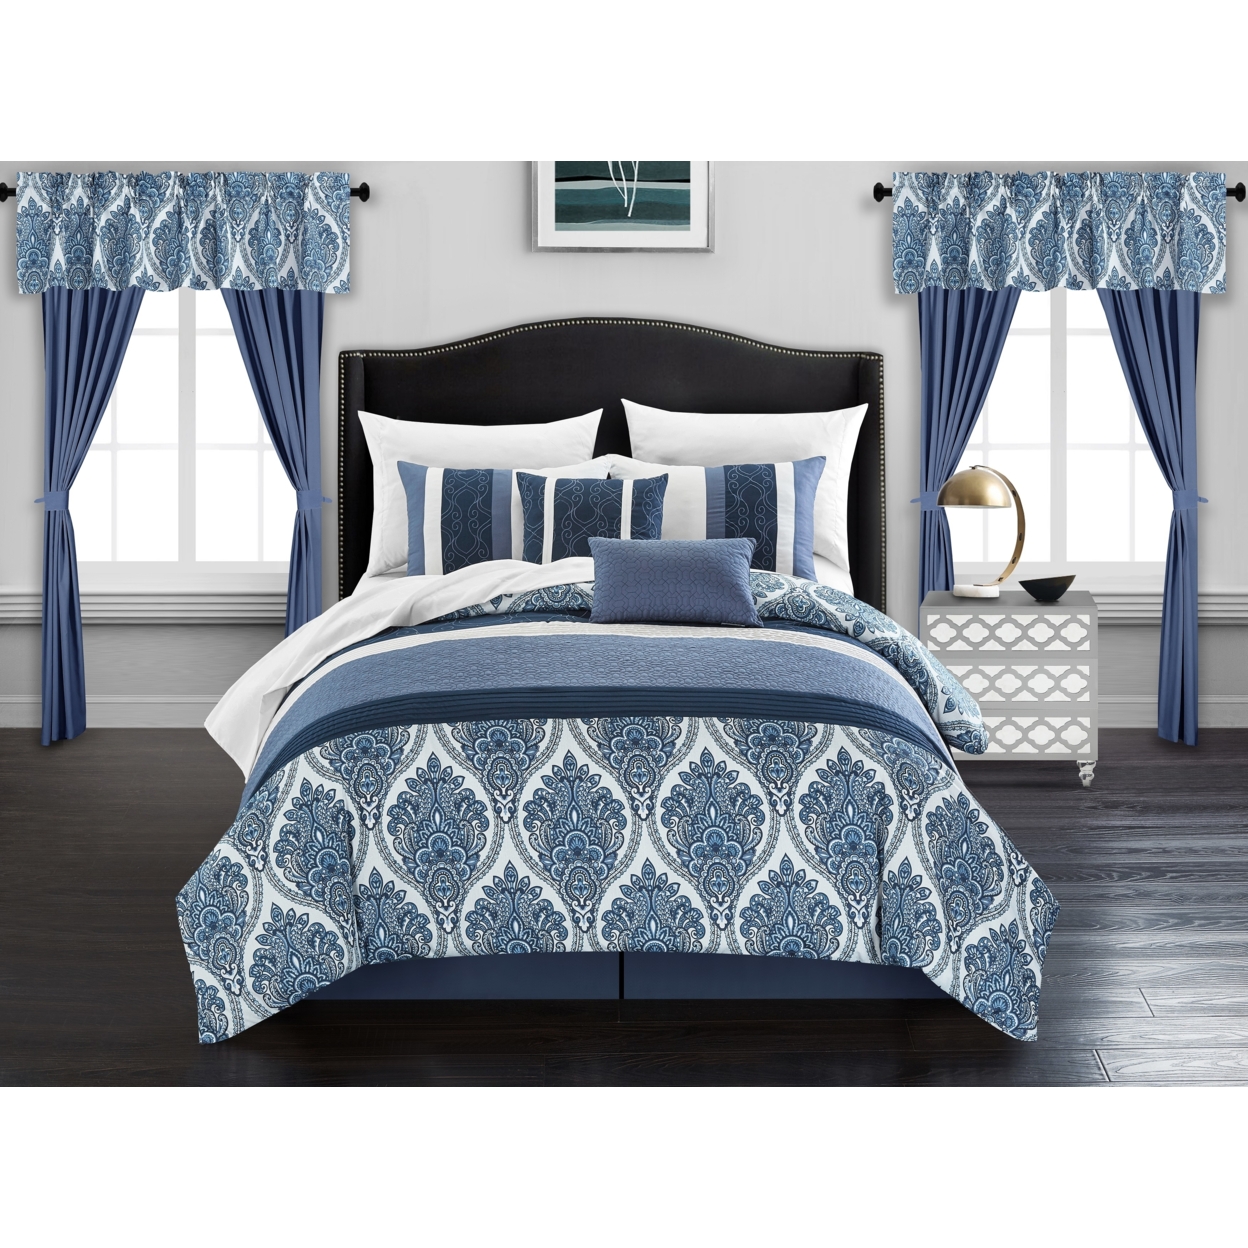 Vivaldi 20 Piece Comforter Set Medallion Quilted Embroidered Design Bed In A Bag Bedding - Aqua, Queen